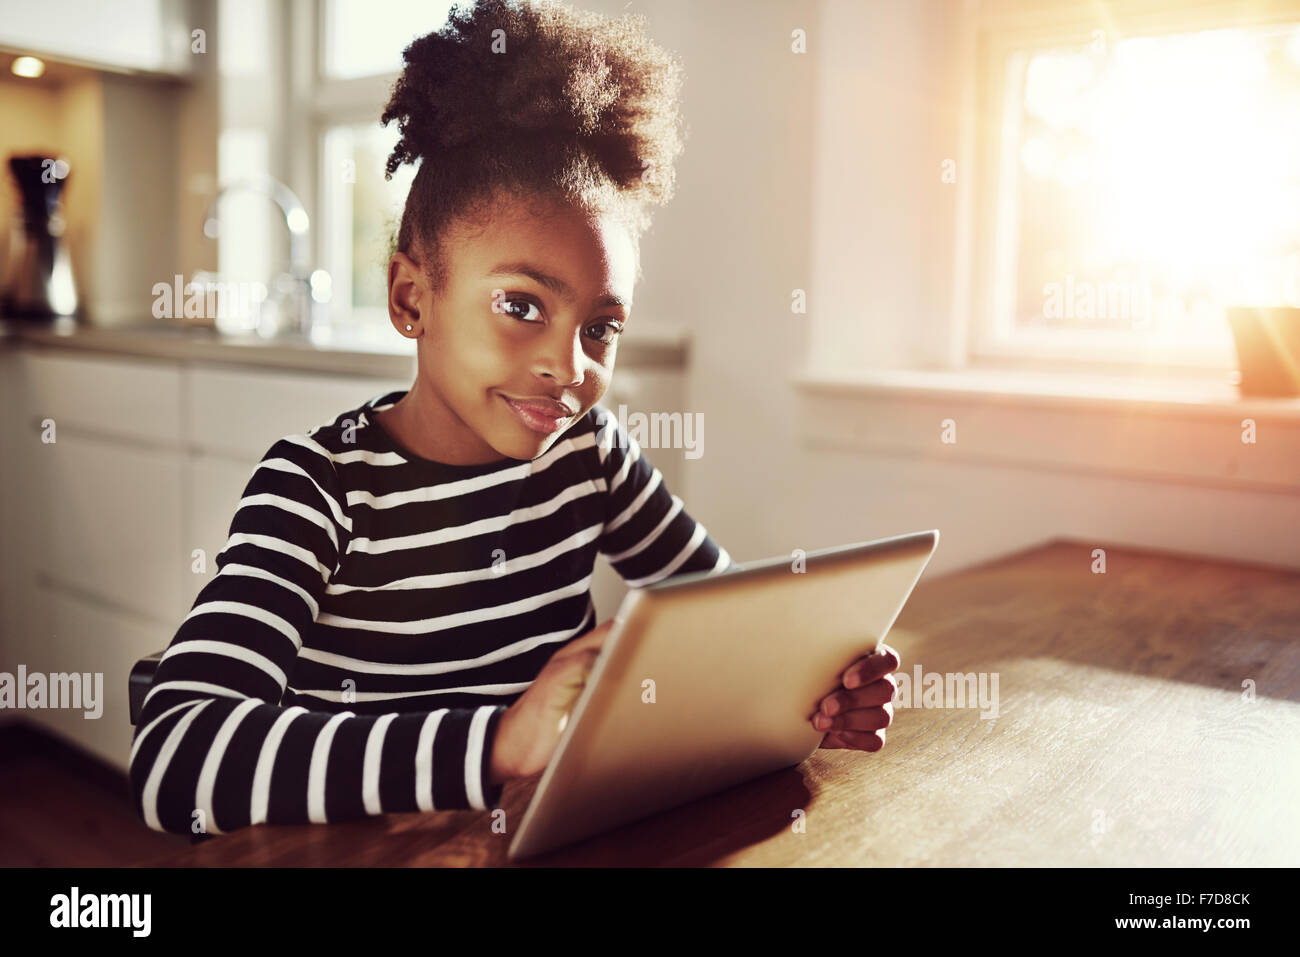 Thoughtful young black girl sitting watching the camera with a pensive expression as she browses the internet on a tablet comput Stock Photo